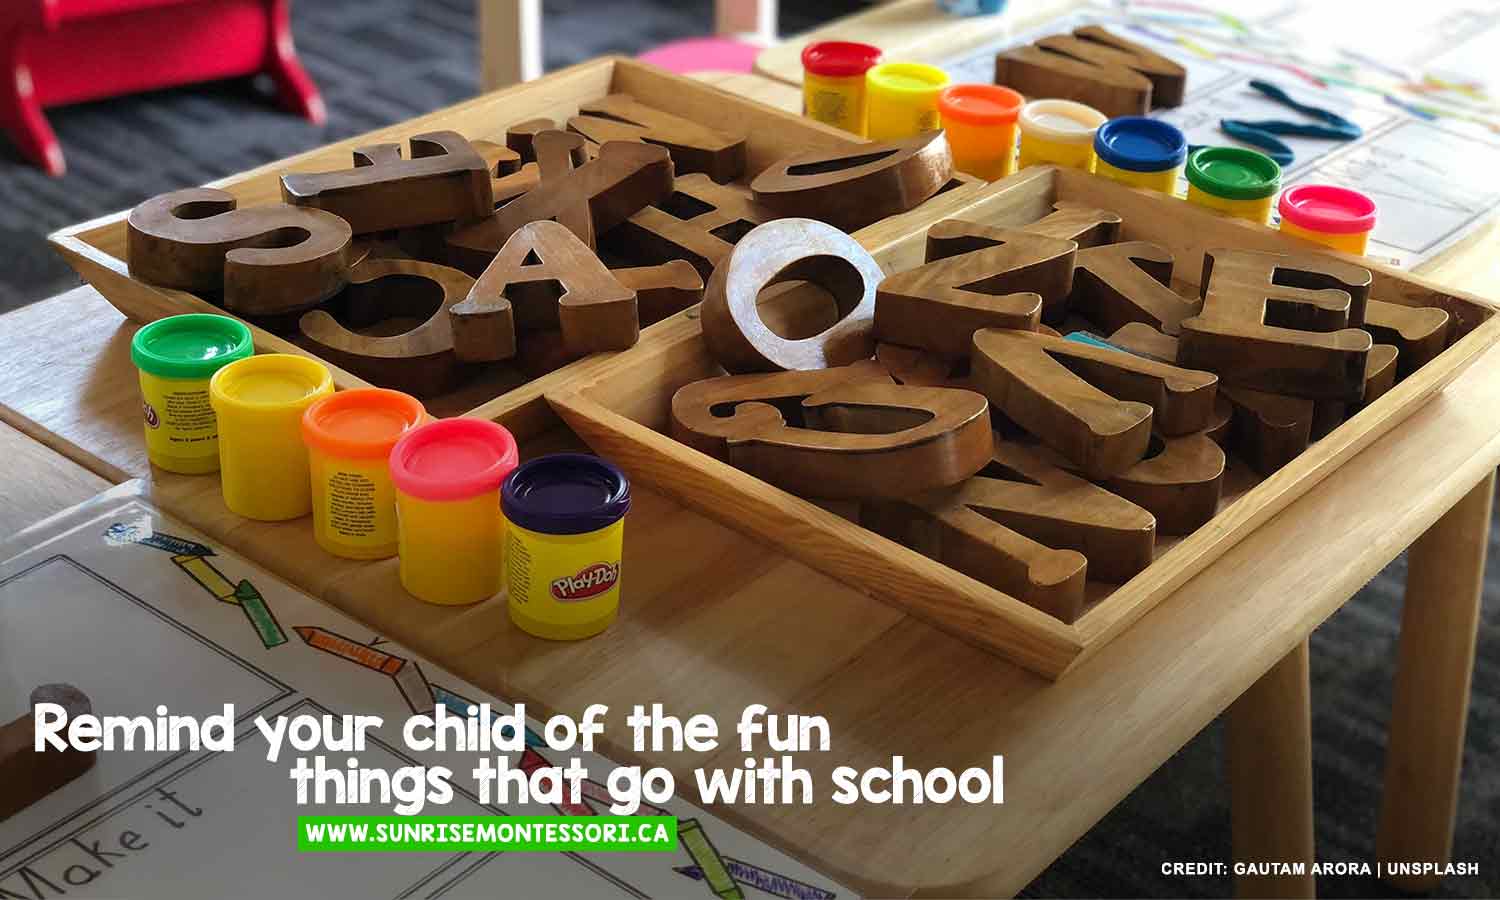 Remind your child of the fun things that go with school